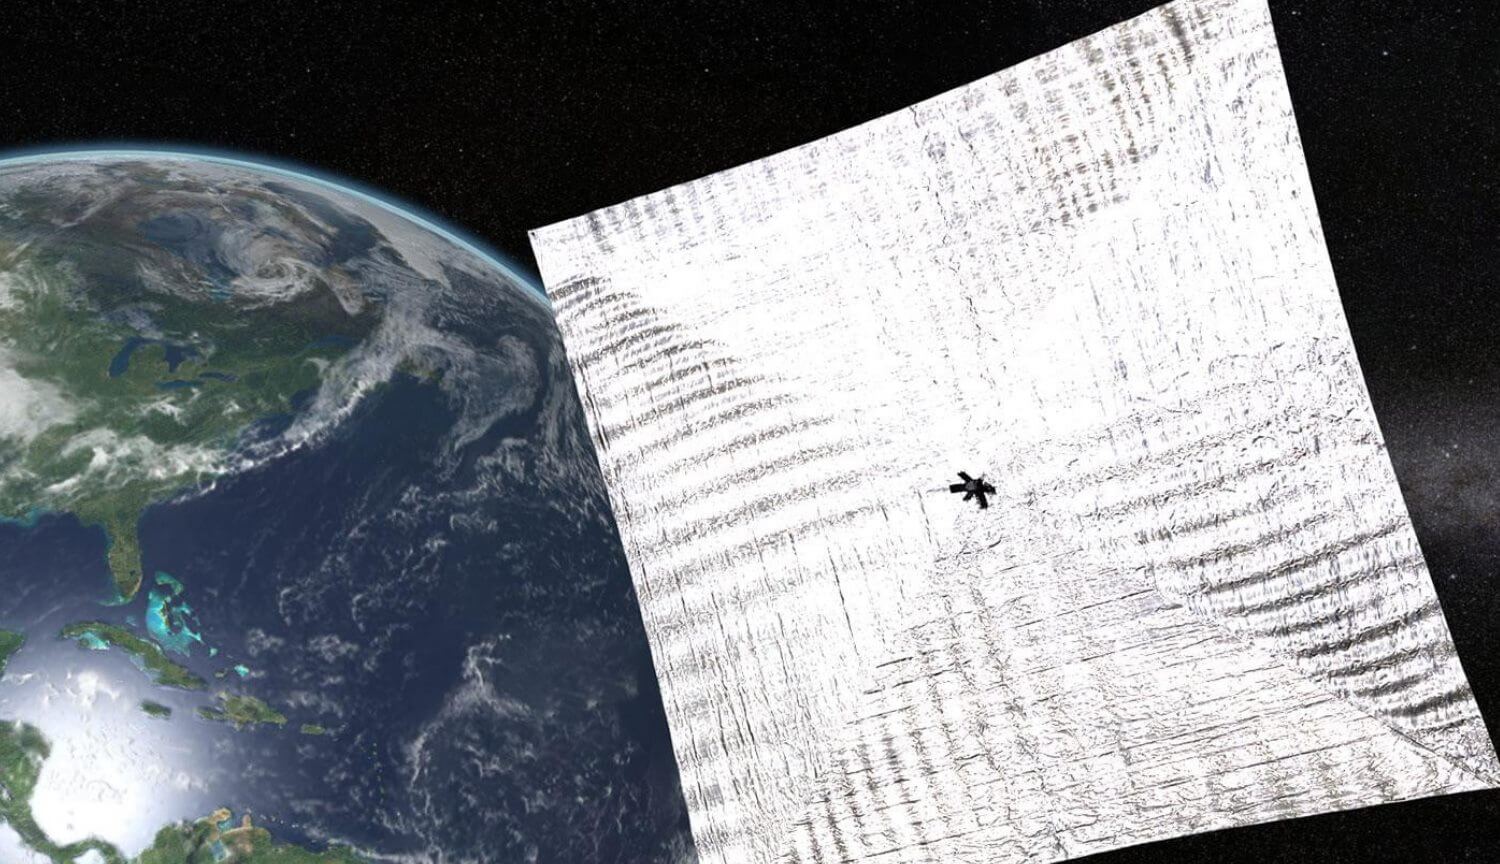 Solar sail LightSail 2 can fly right over you. How to see it?